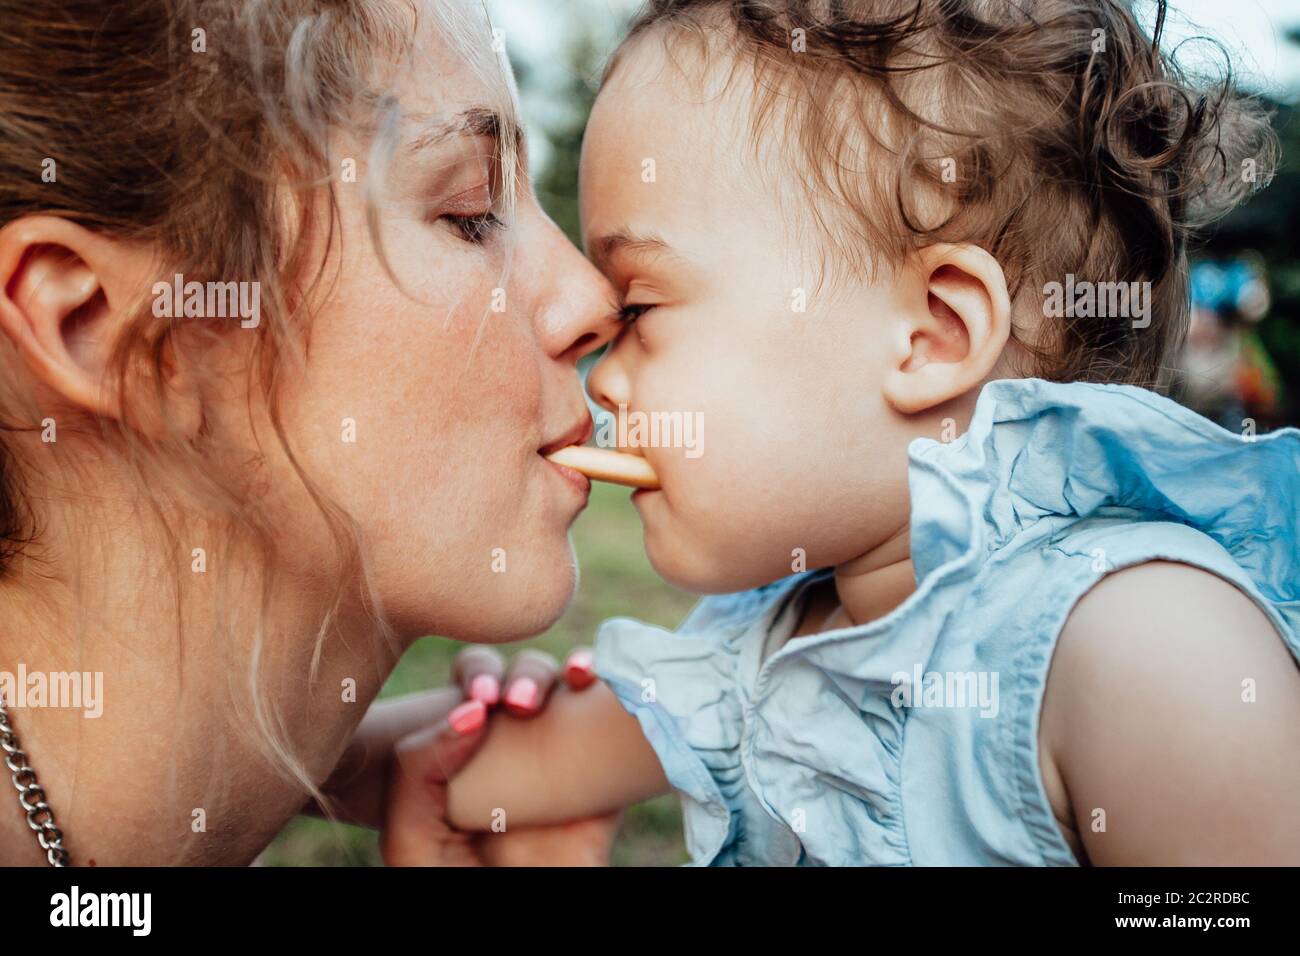 Portrait of a young girl being held by his mother.   Head to head, looking at each other Stock Photo